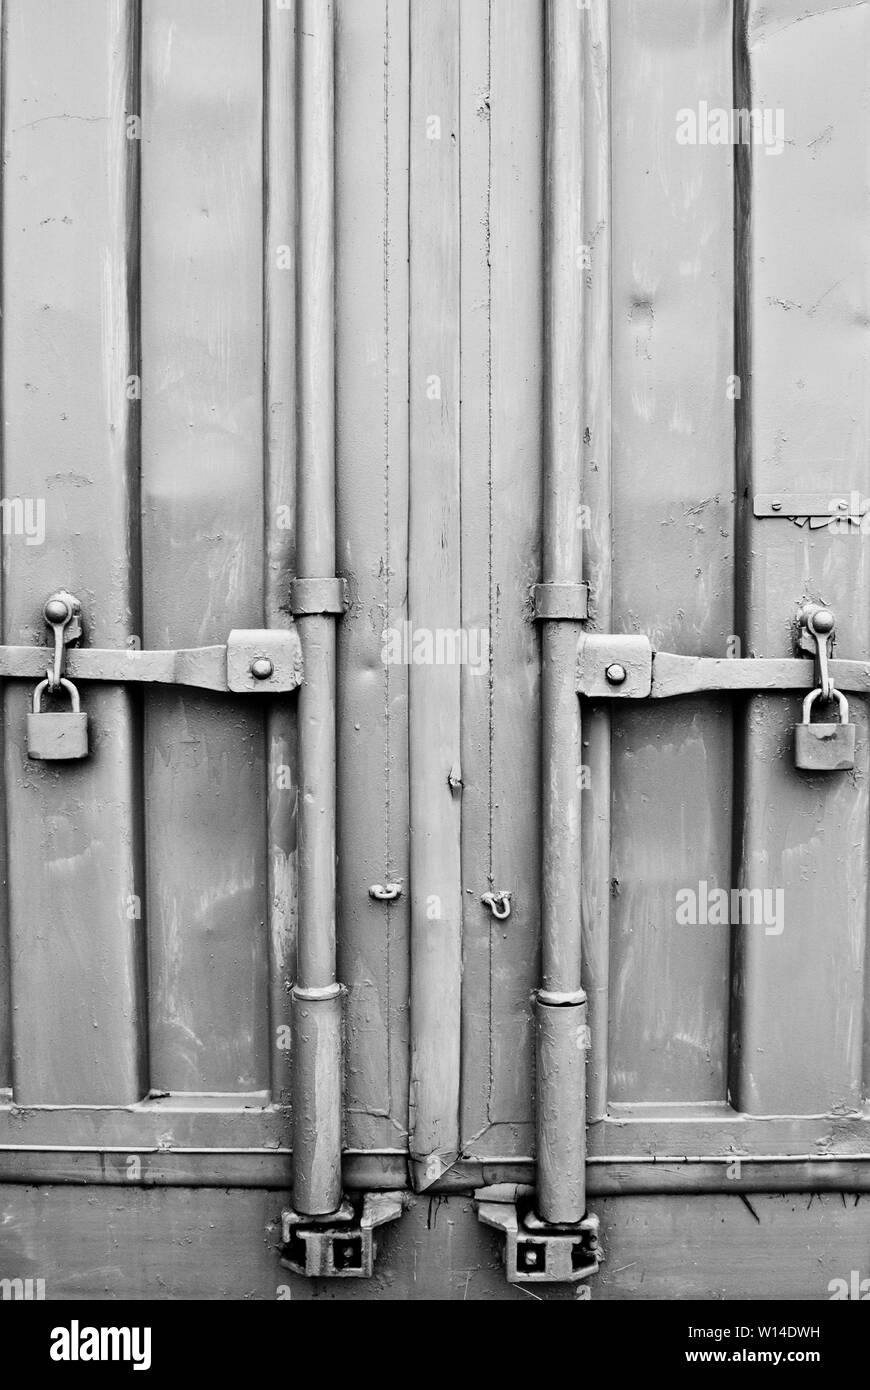 metal gray industrial container doors with locks Stock Photo